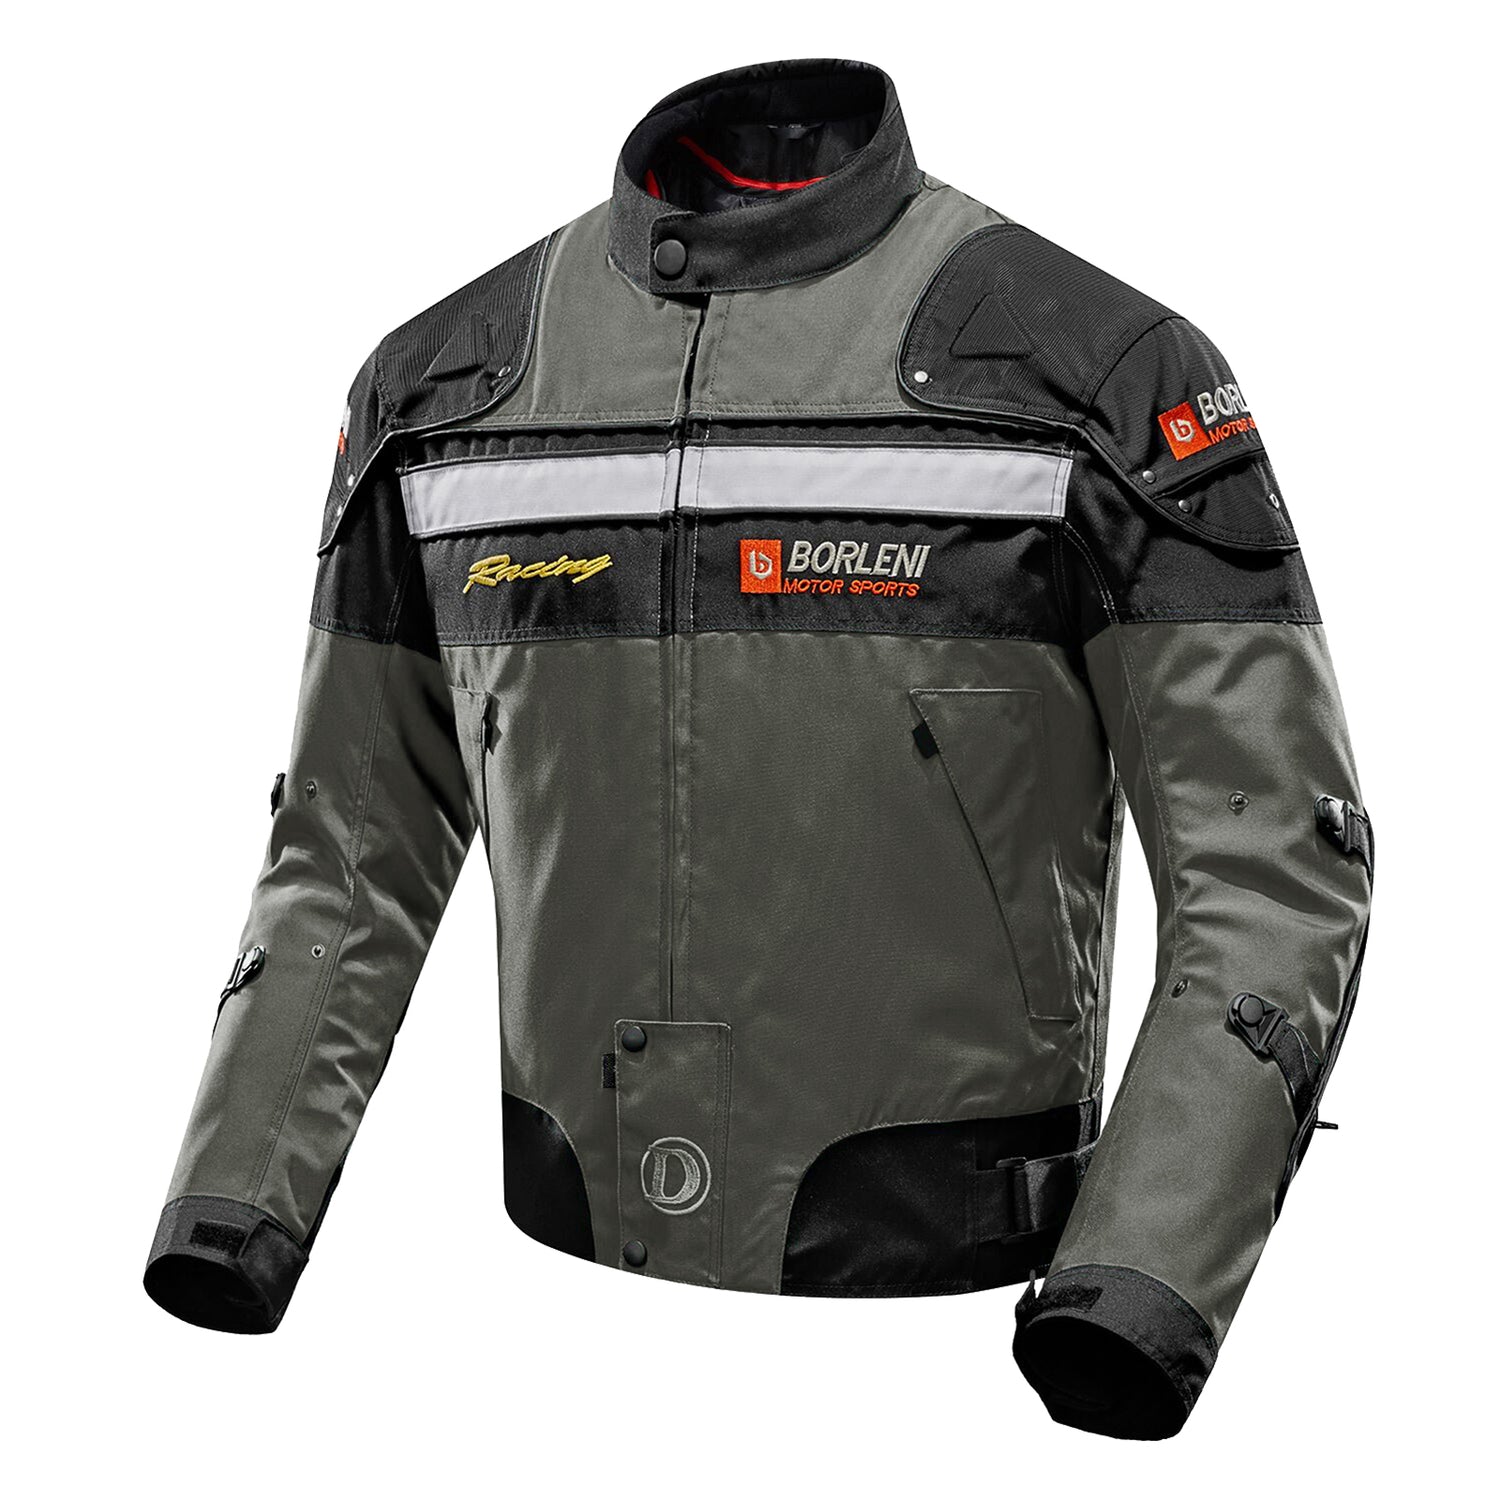 Jacket Windproof Motorcycle D-020 Armor – IRONJIAS |